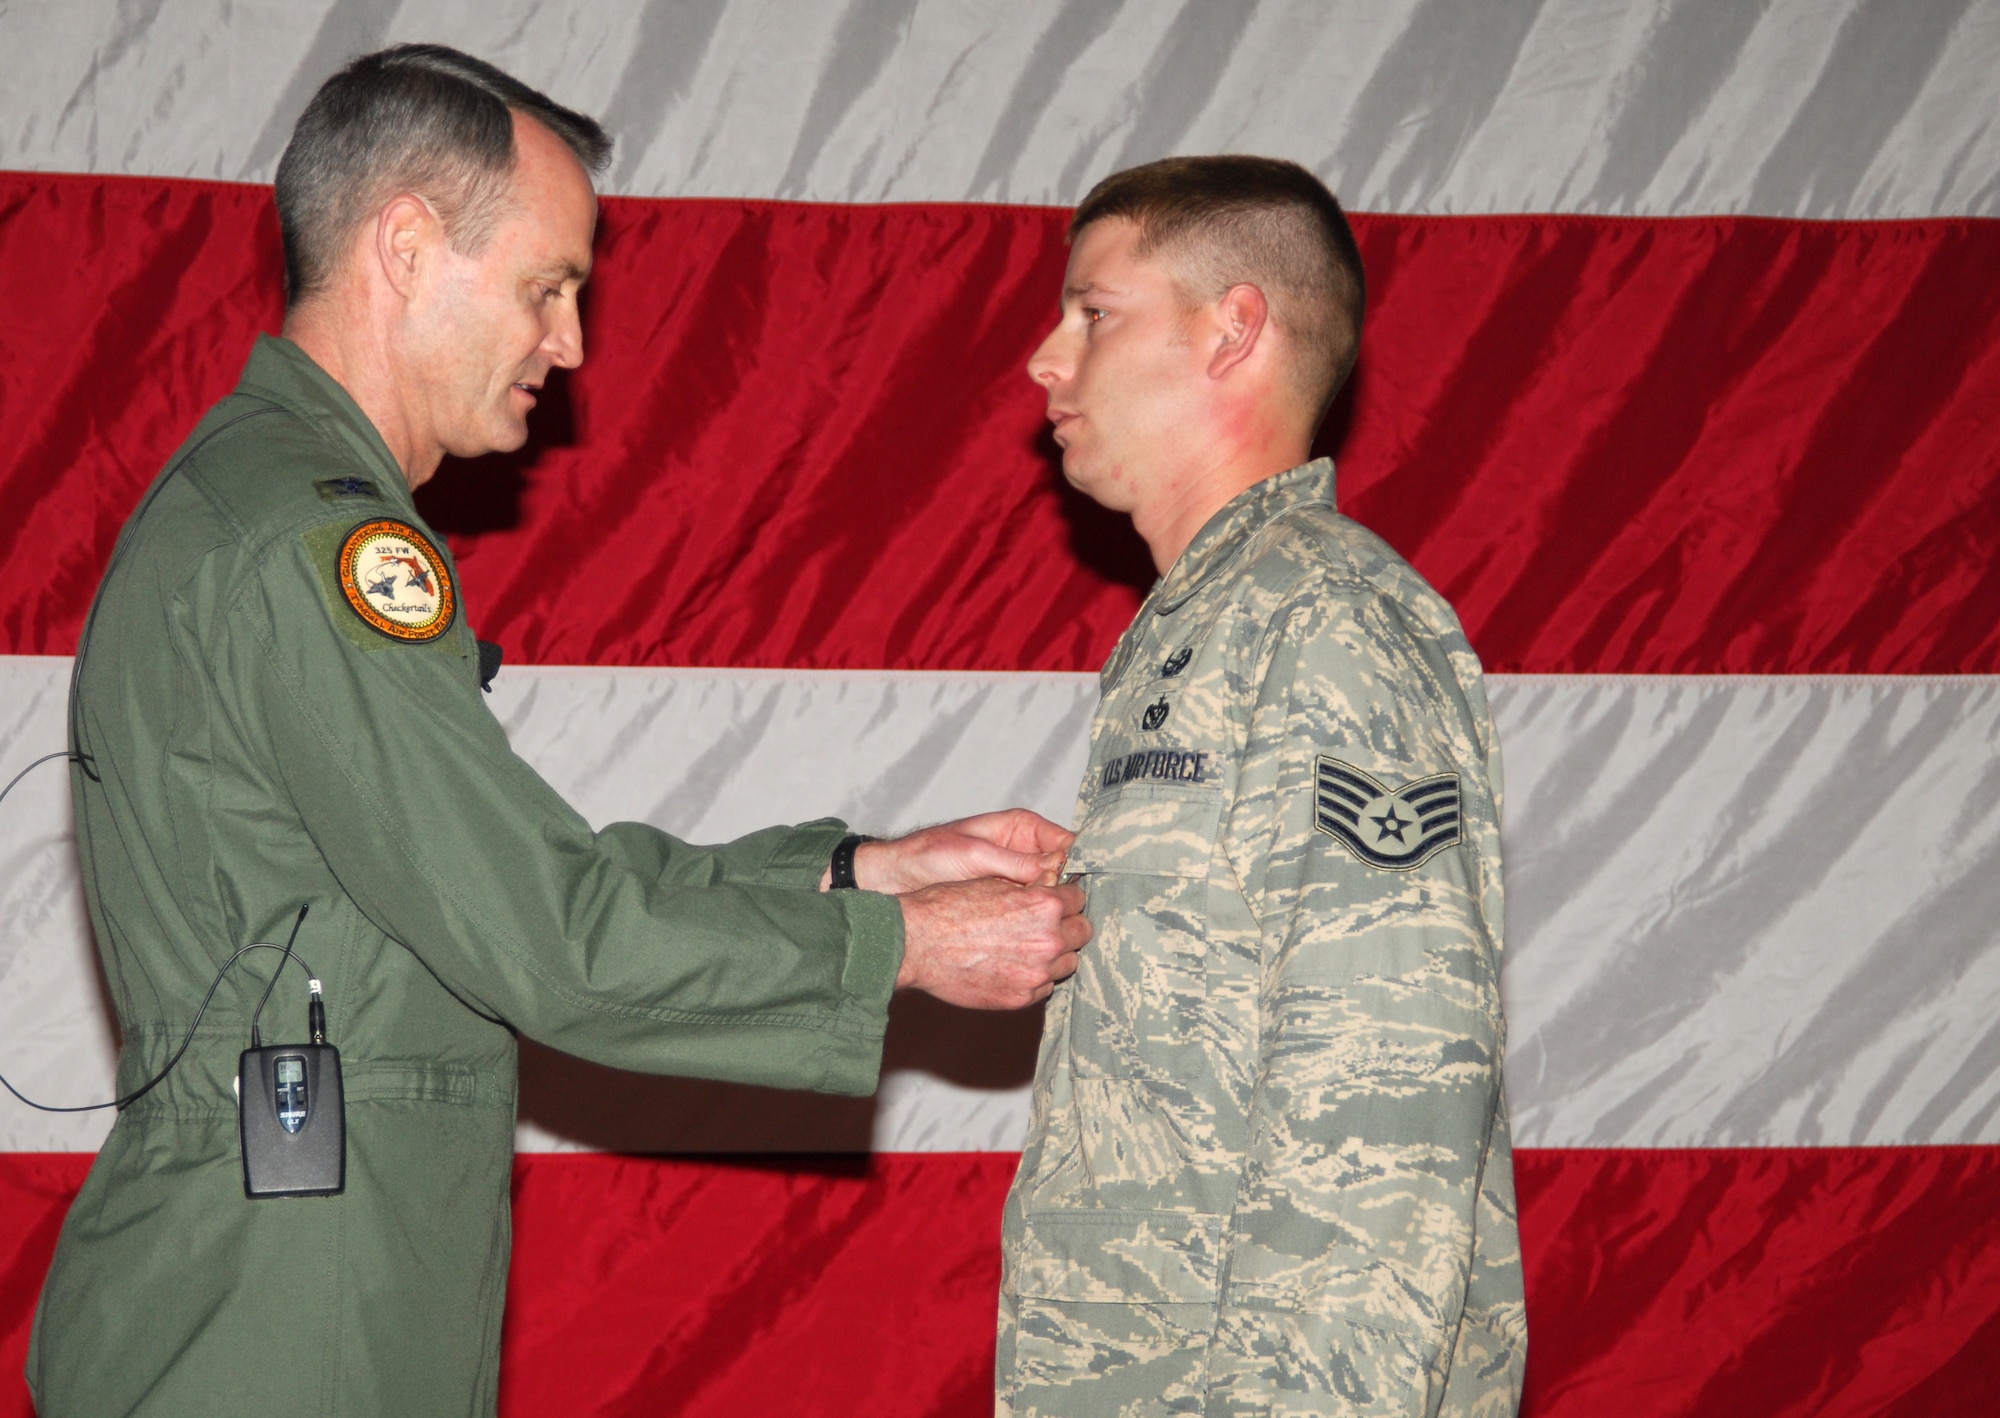 Col. Darryl Roberson, 325th Fighter Wing commander, pins the Air Force Combat Action Medal to Staff Sgt. Jonathon Morrison, 325th Civil Engineer Squadron explosive ordinance disposal craftsman, during the Commander’s Call ceremony here March 14.  (U.S. Air Force photo/Lisa Norman)